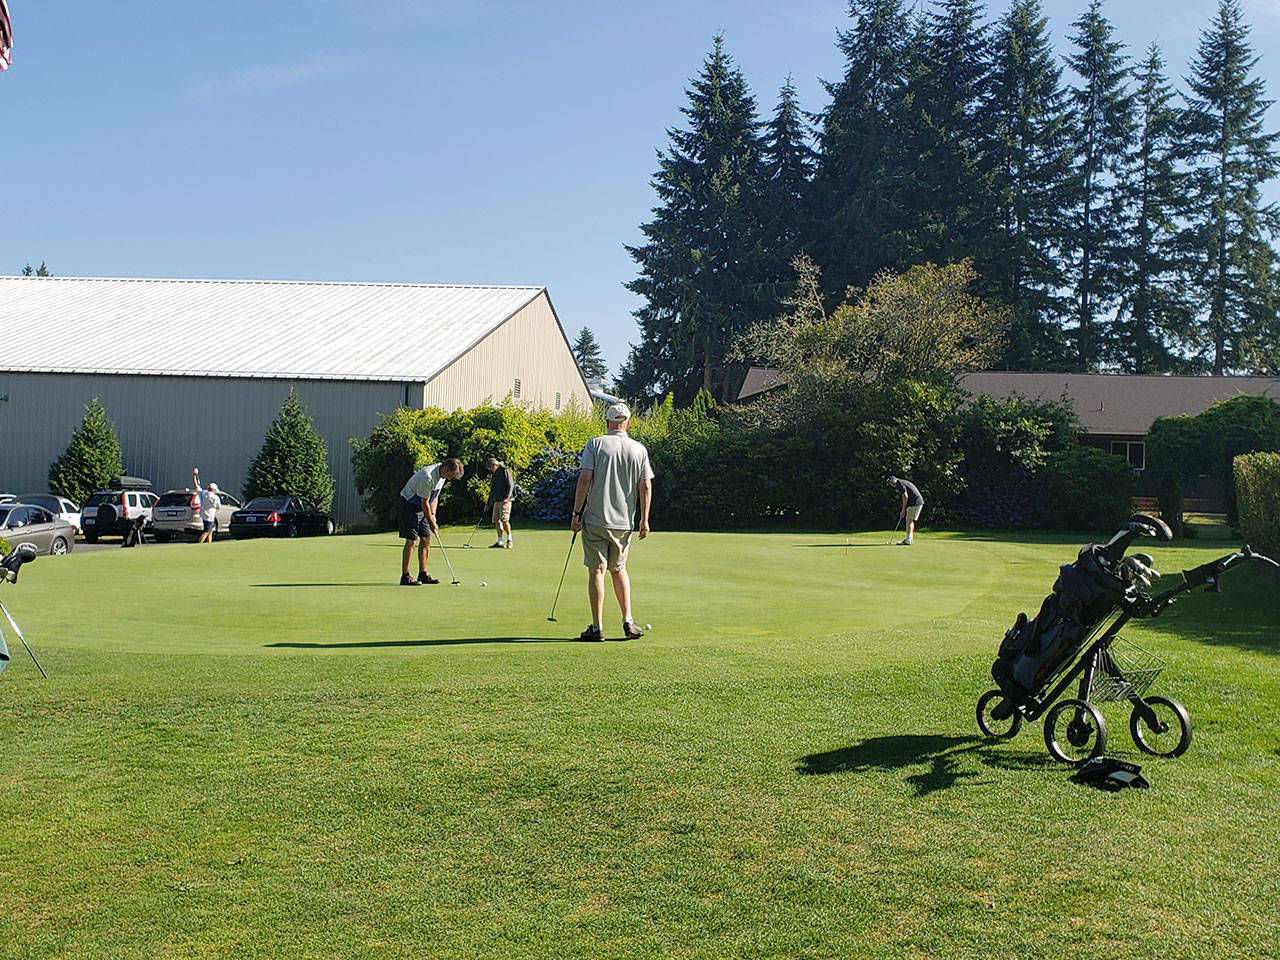 White Horse, Meadowmeer seeing an uptick in golf interest during pandemic